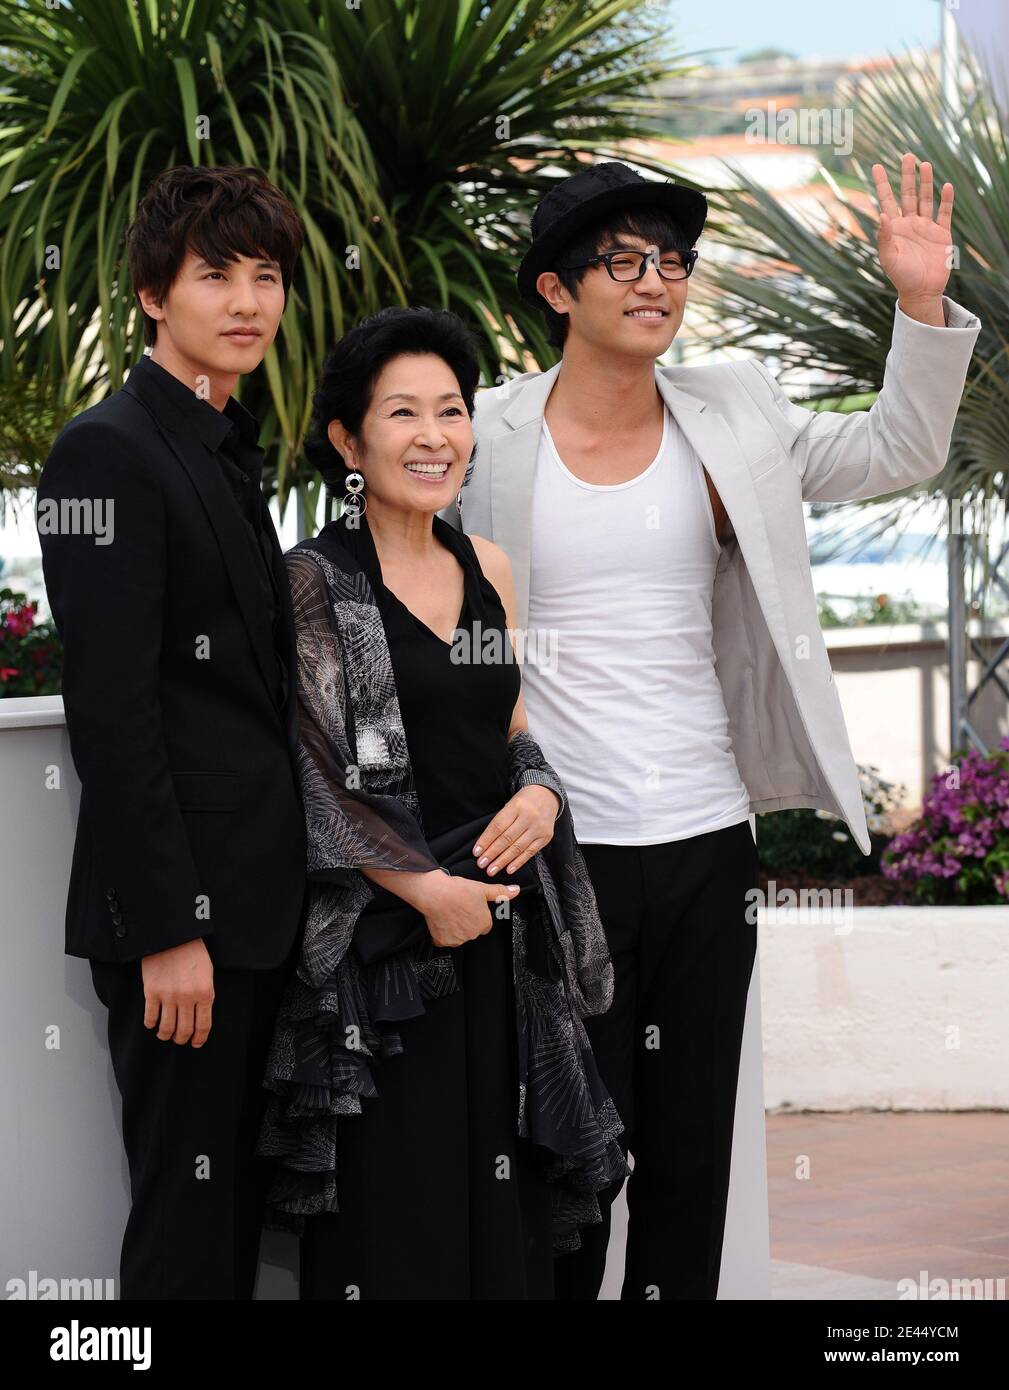 'Jin Goo, Kim Hye-Ja and Won Bin pose during the photo call of ''Mother'' at the 62nd Cannes Film Festival. Cannes, France, May 16, 2009. Photo by Lionel Hahn/ABACAPRESS.COM' Stock Photo